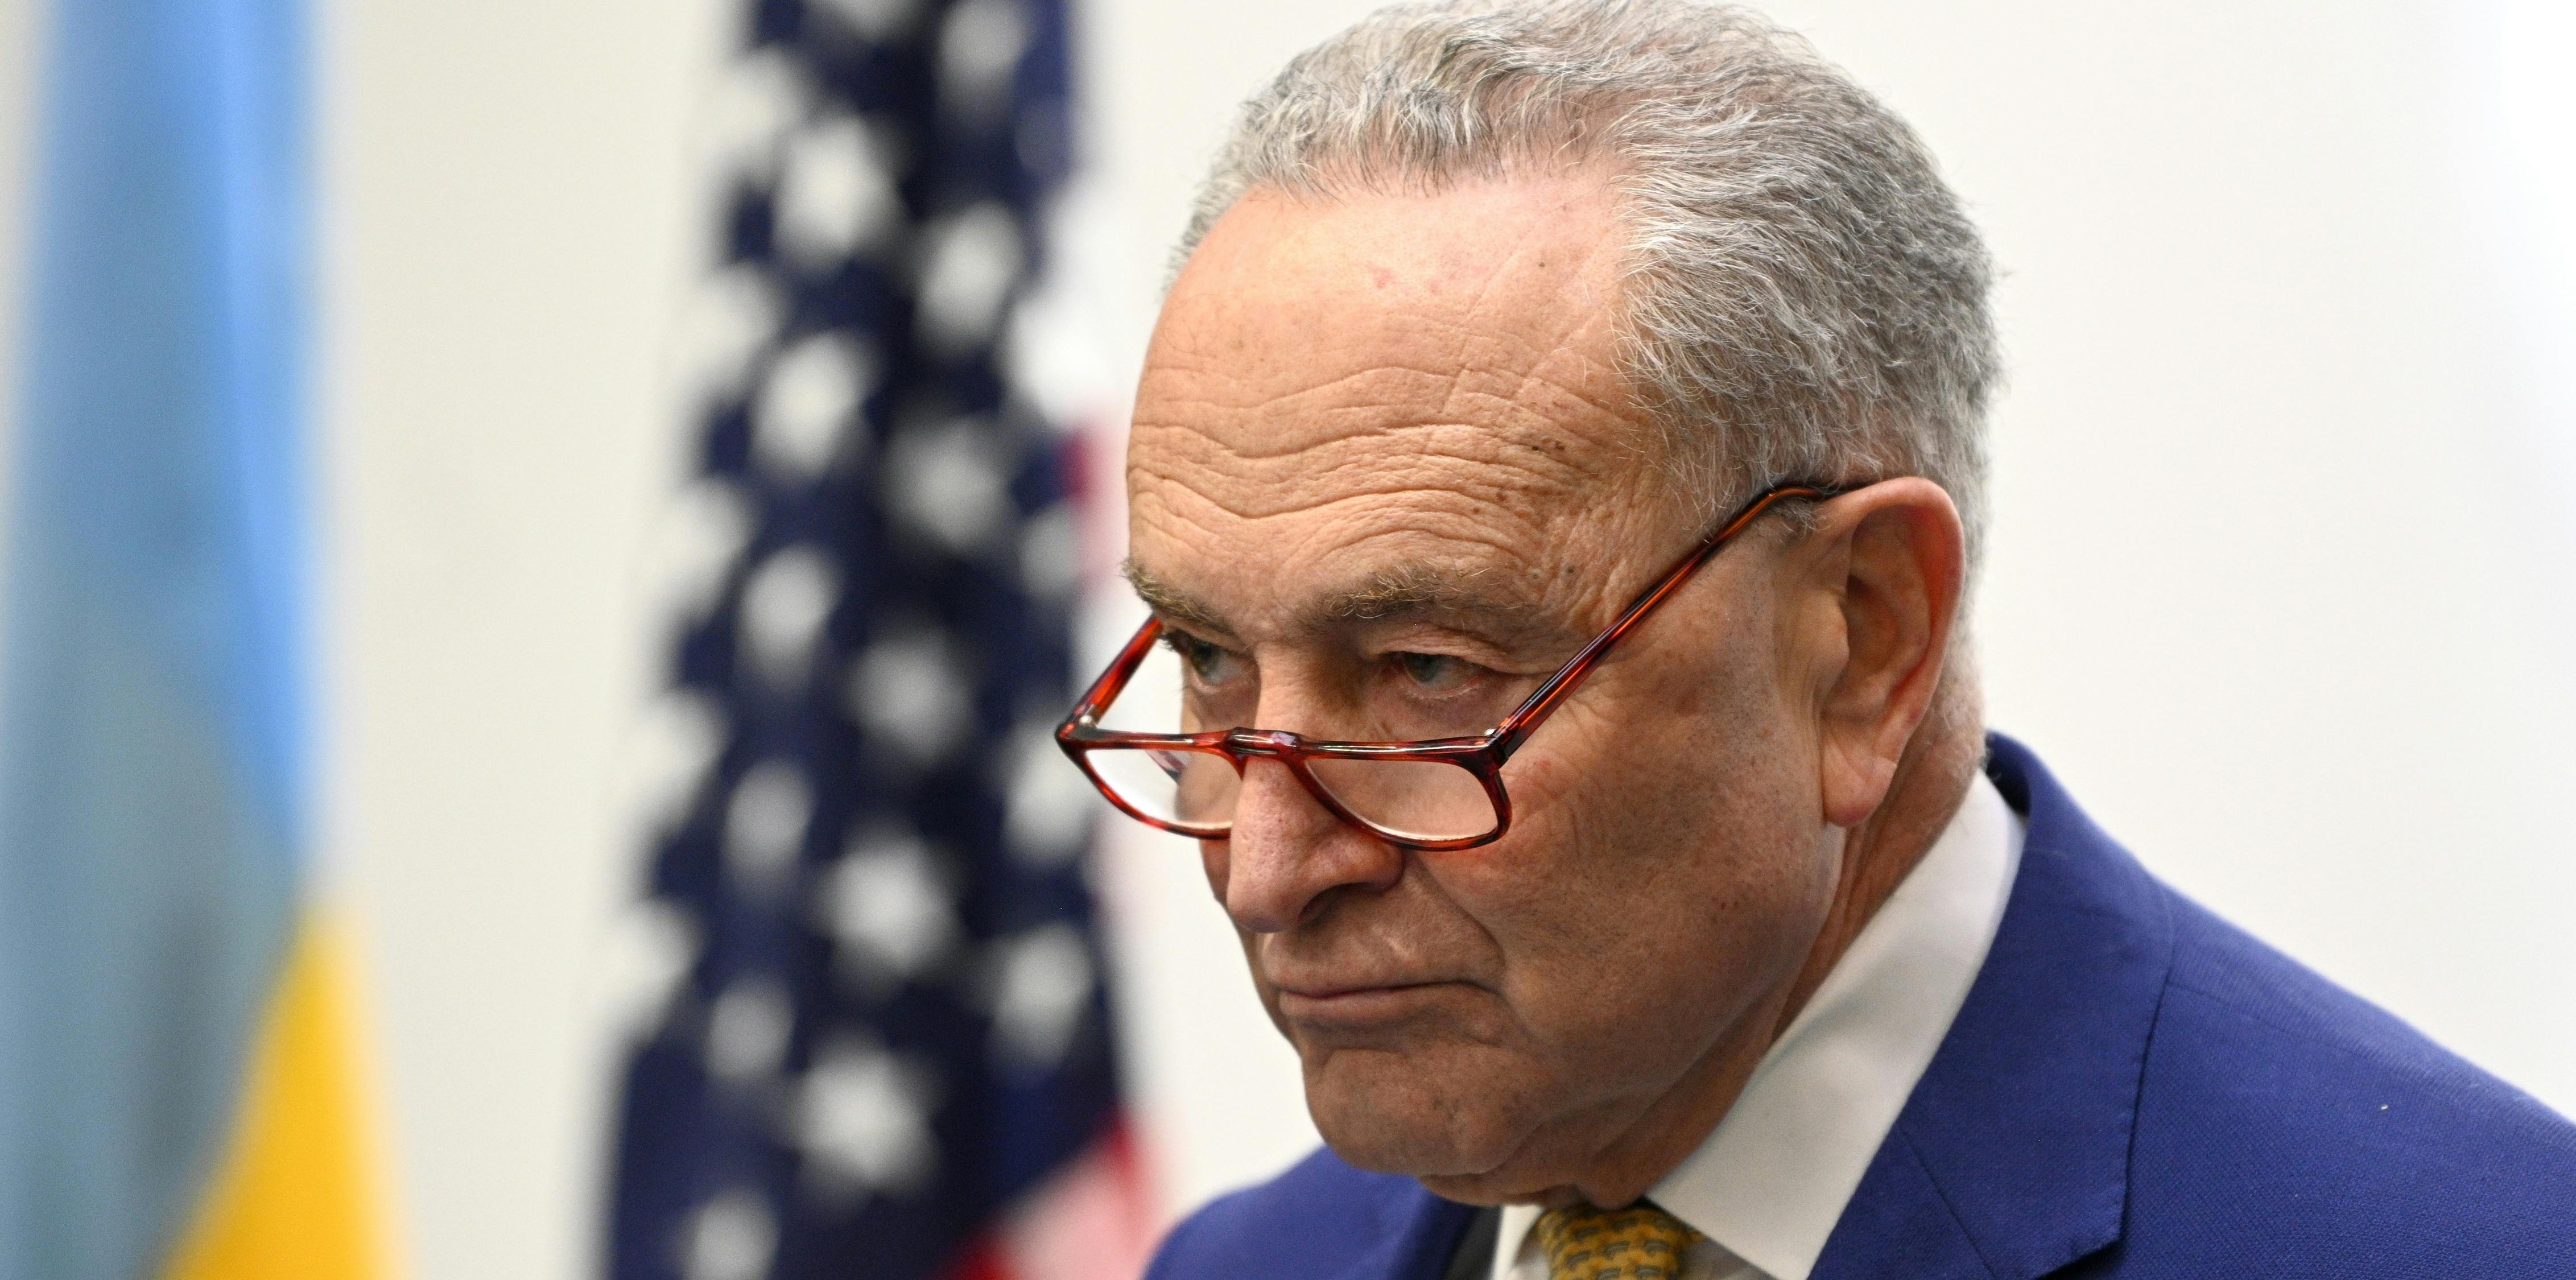 ‘Can’t even pretend to be normal’: Chuck Schumer’s homemade cheeseburger was so gross he deleted the evidence